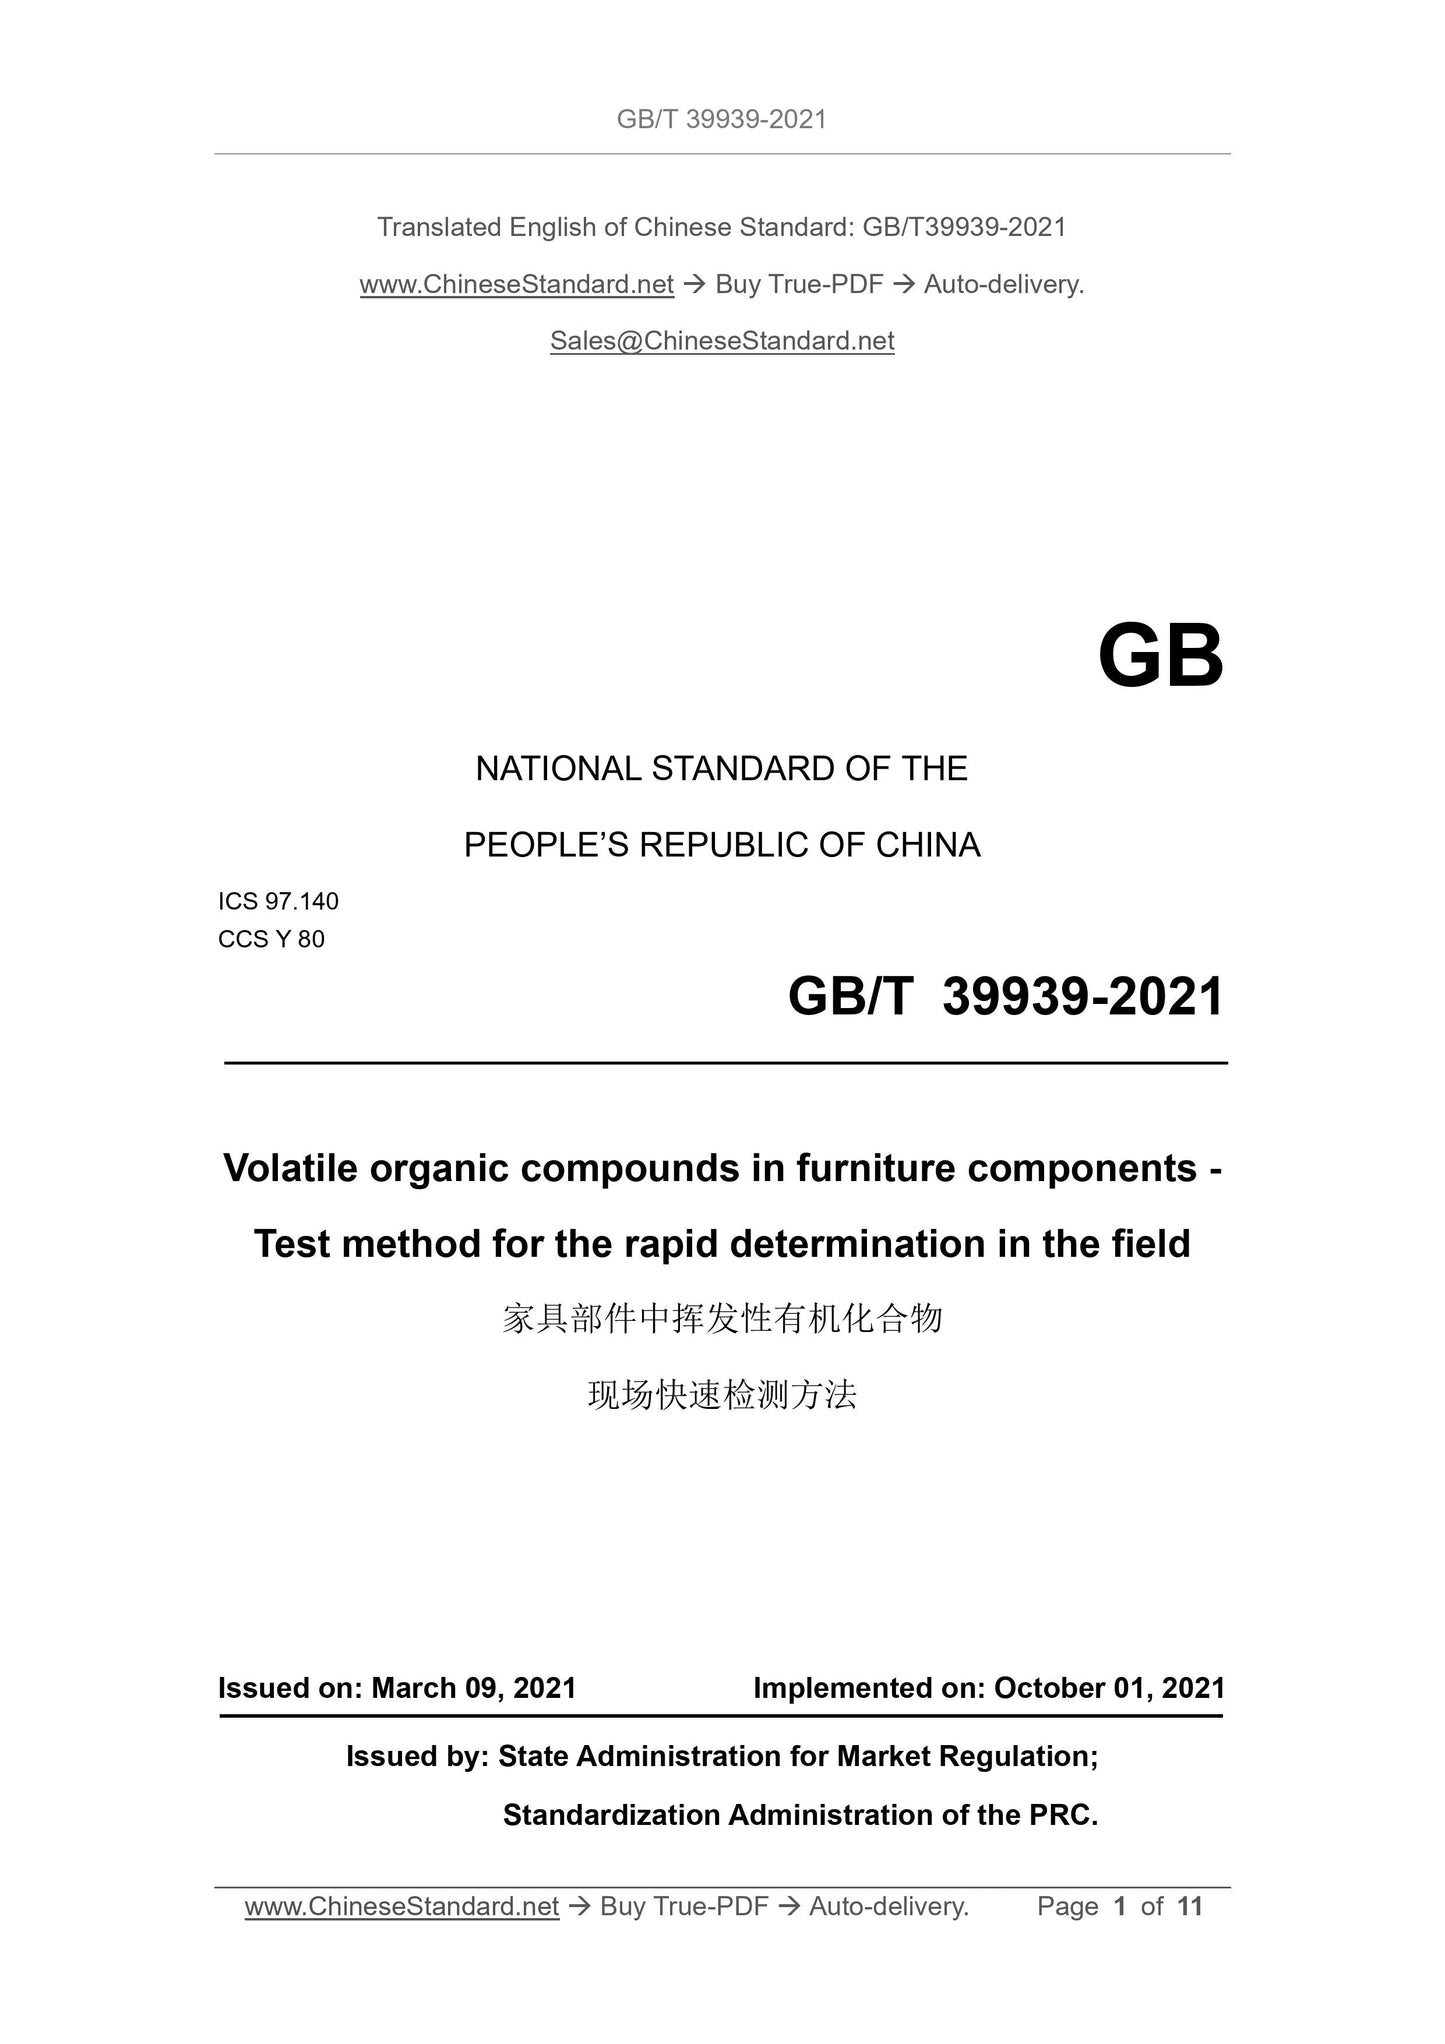 GB/T 39939-2021 Page 1